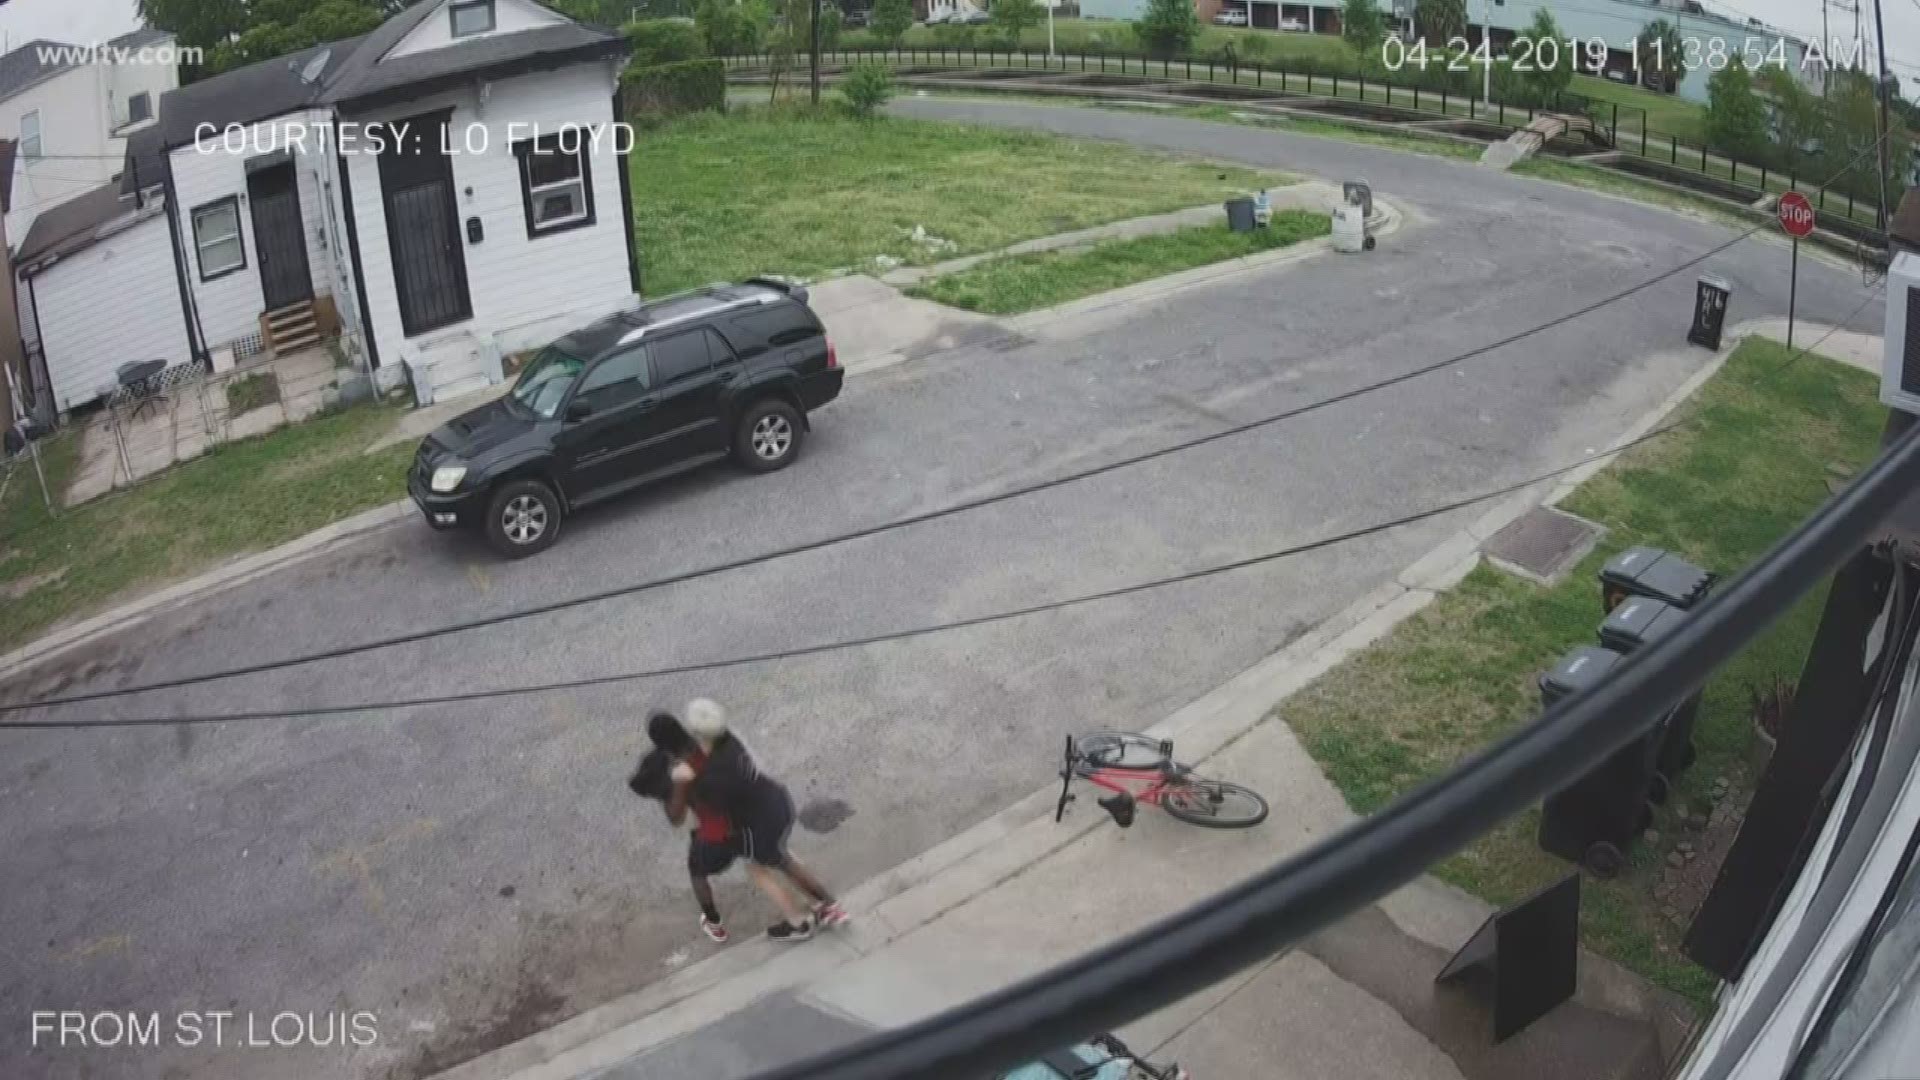 Law enforcement experts weigh in on attempted robbery video.